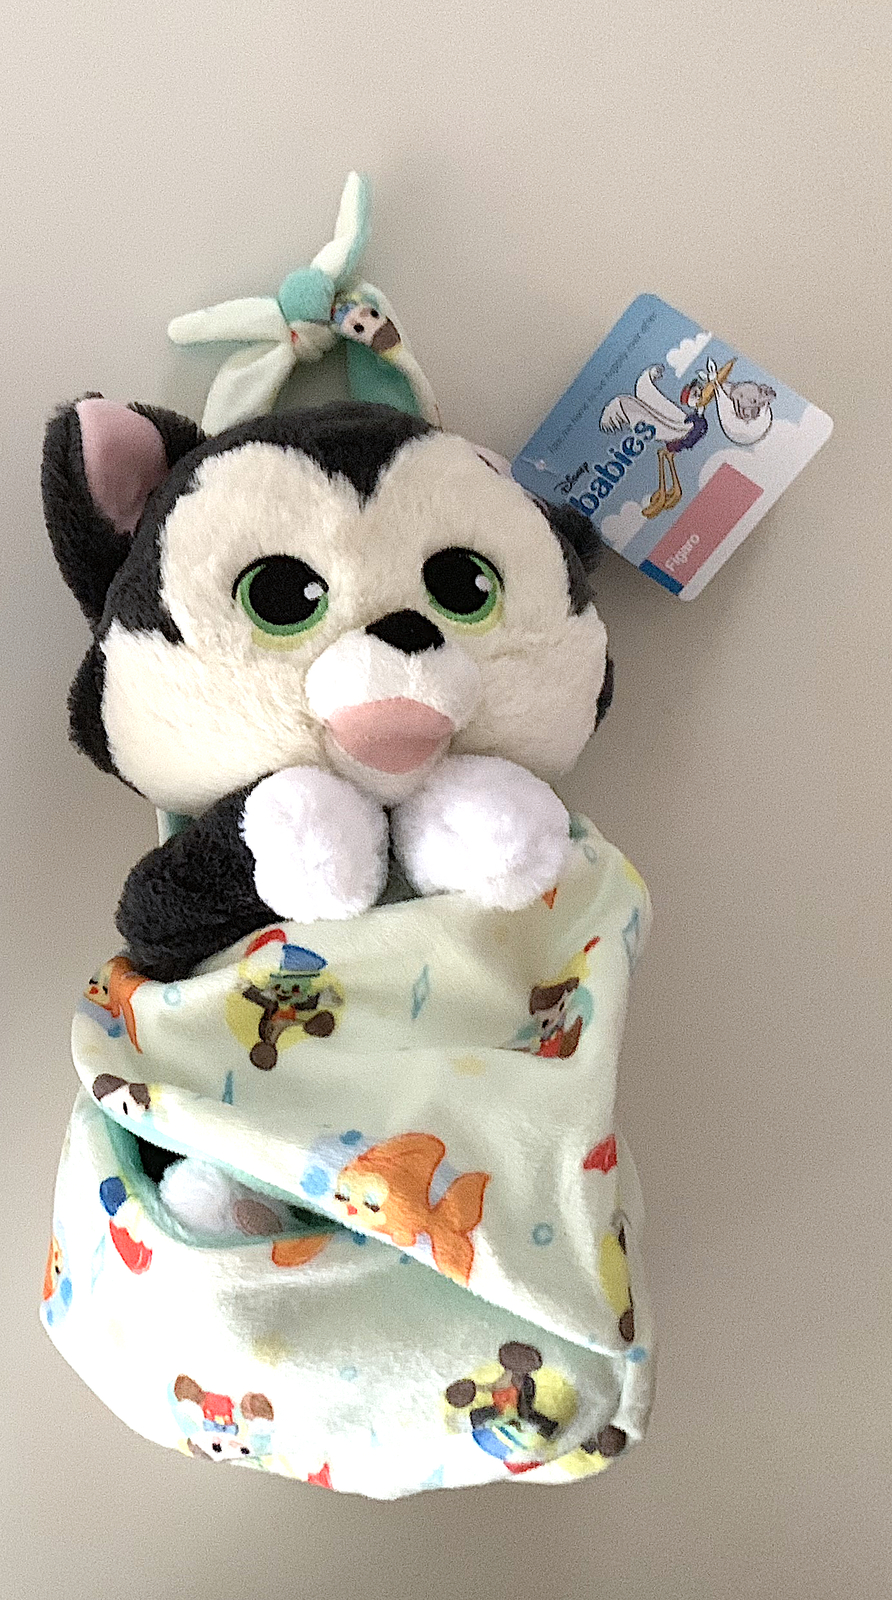 disney's babies plush doll and blanket